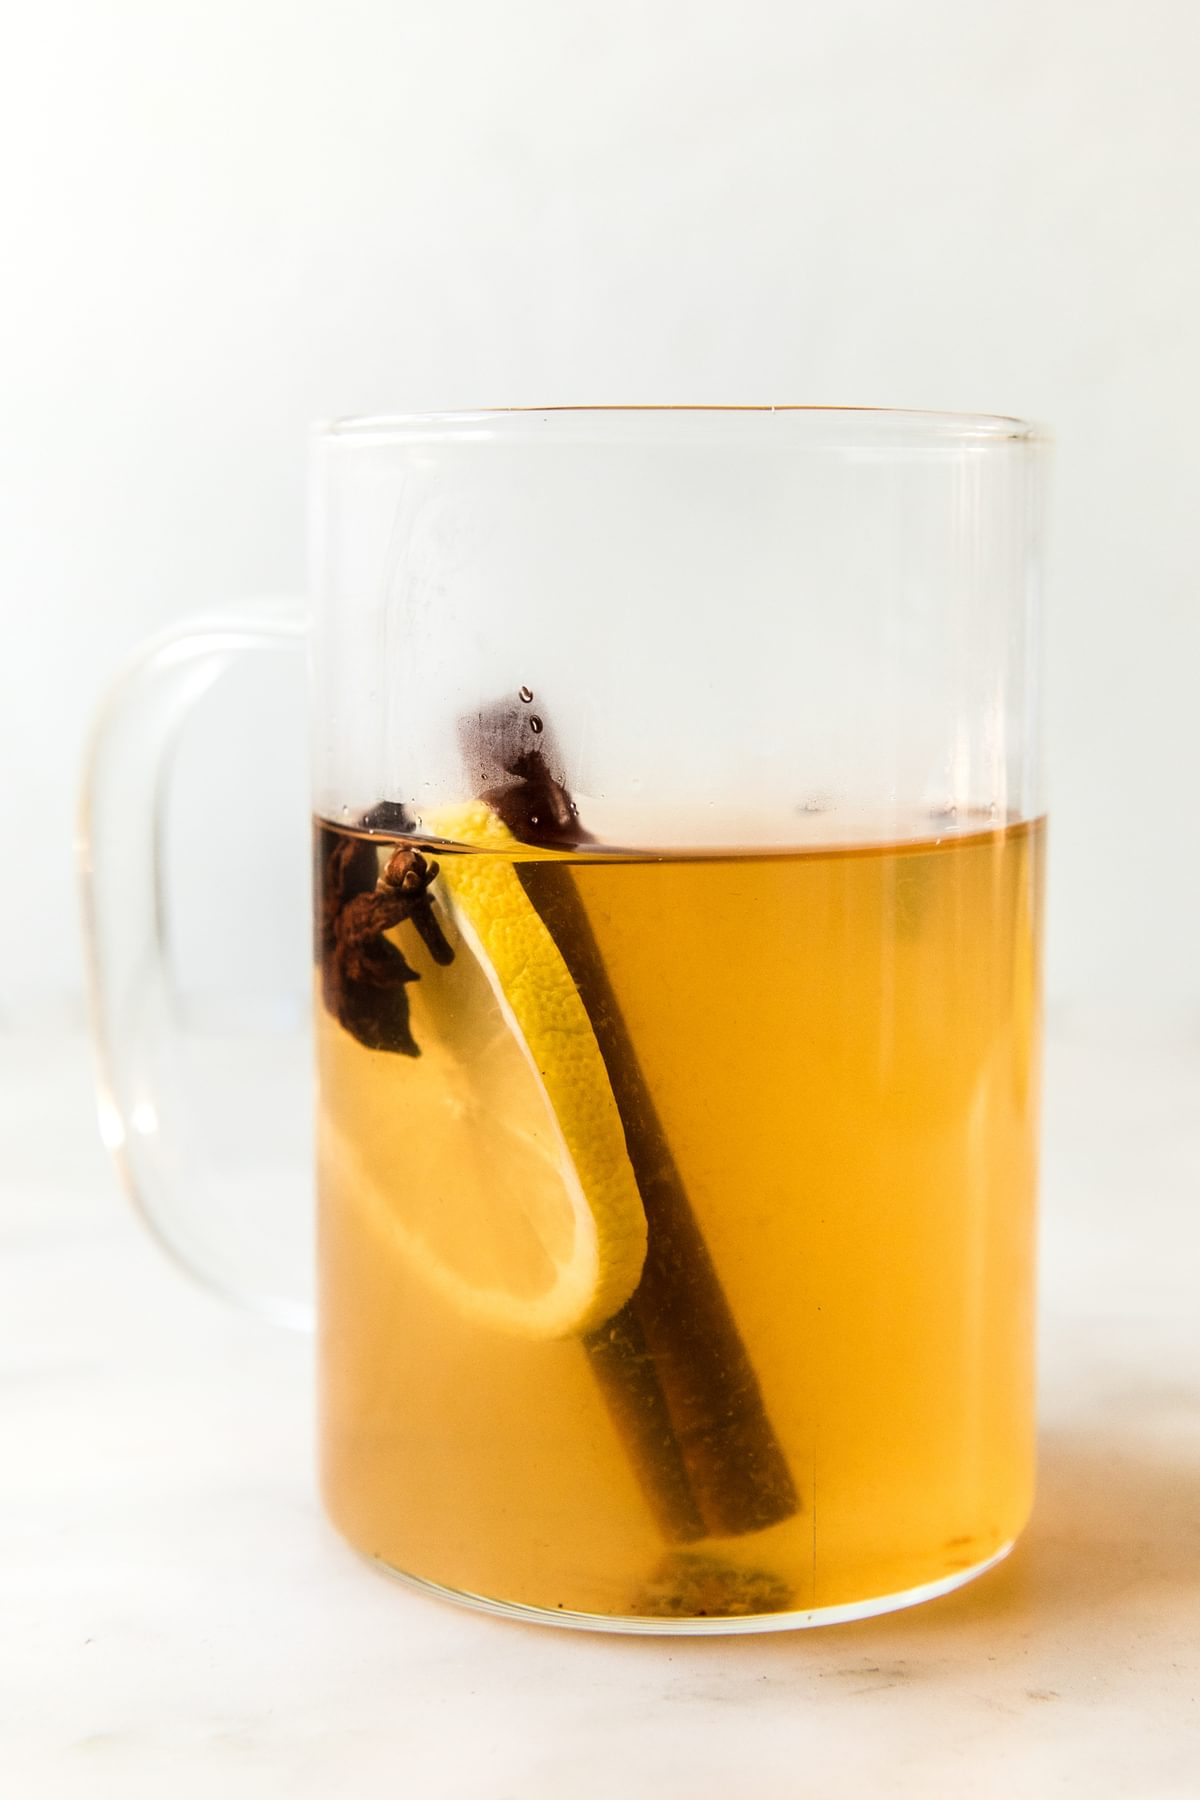 homemade hot toddy recipe with a lemon slice and cinnamon stick in a mug on the counter